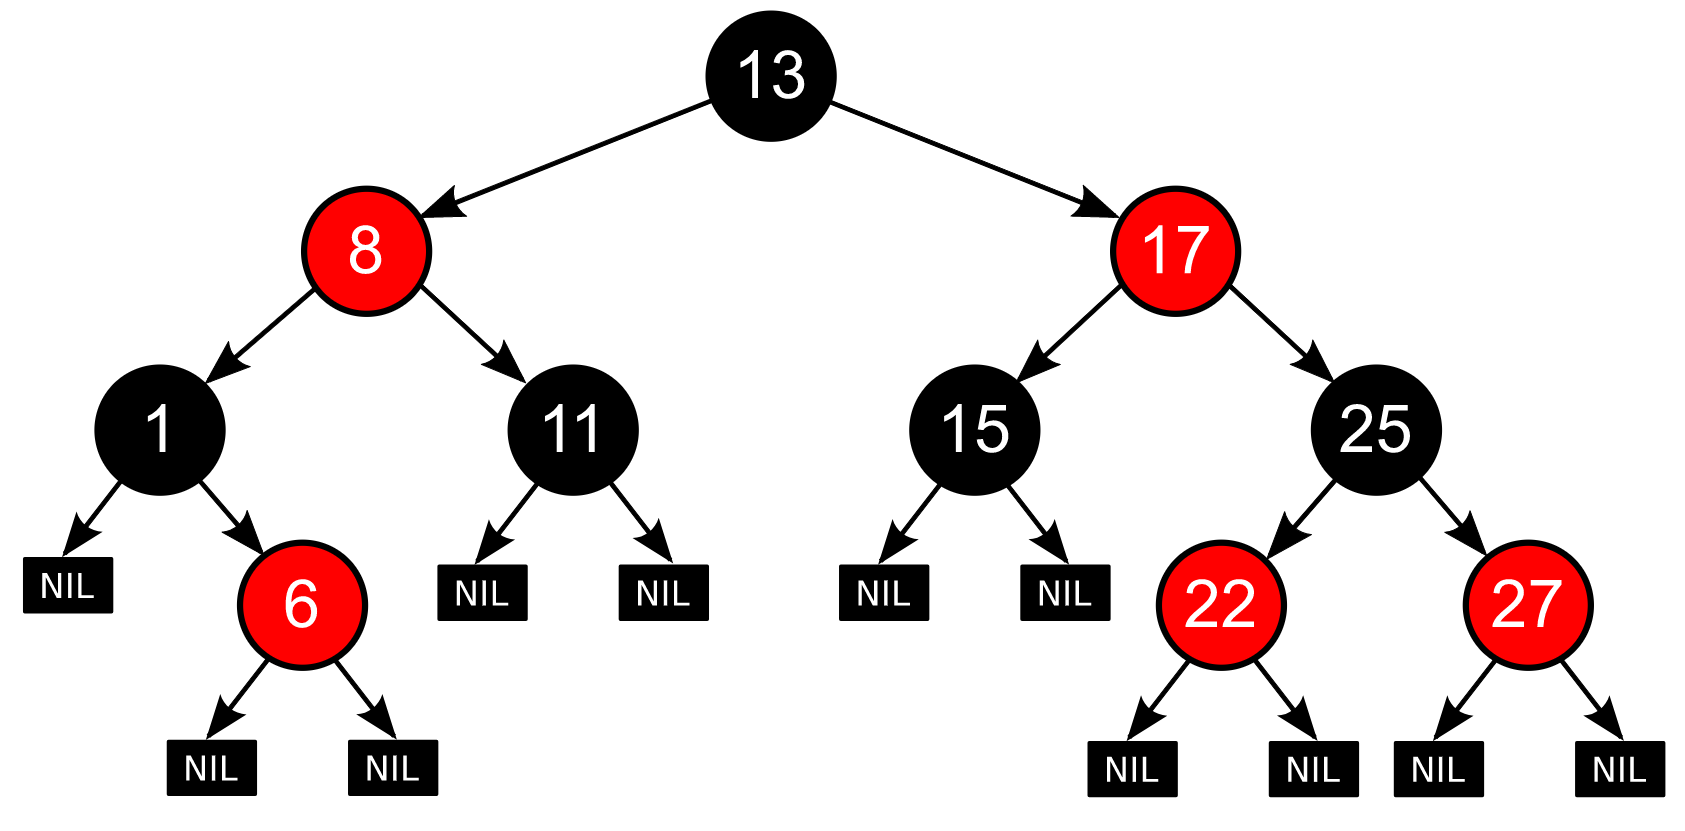 red black tree | Trees in Data Structure